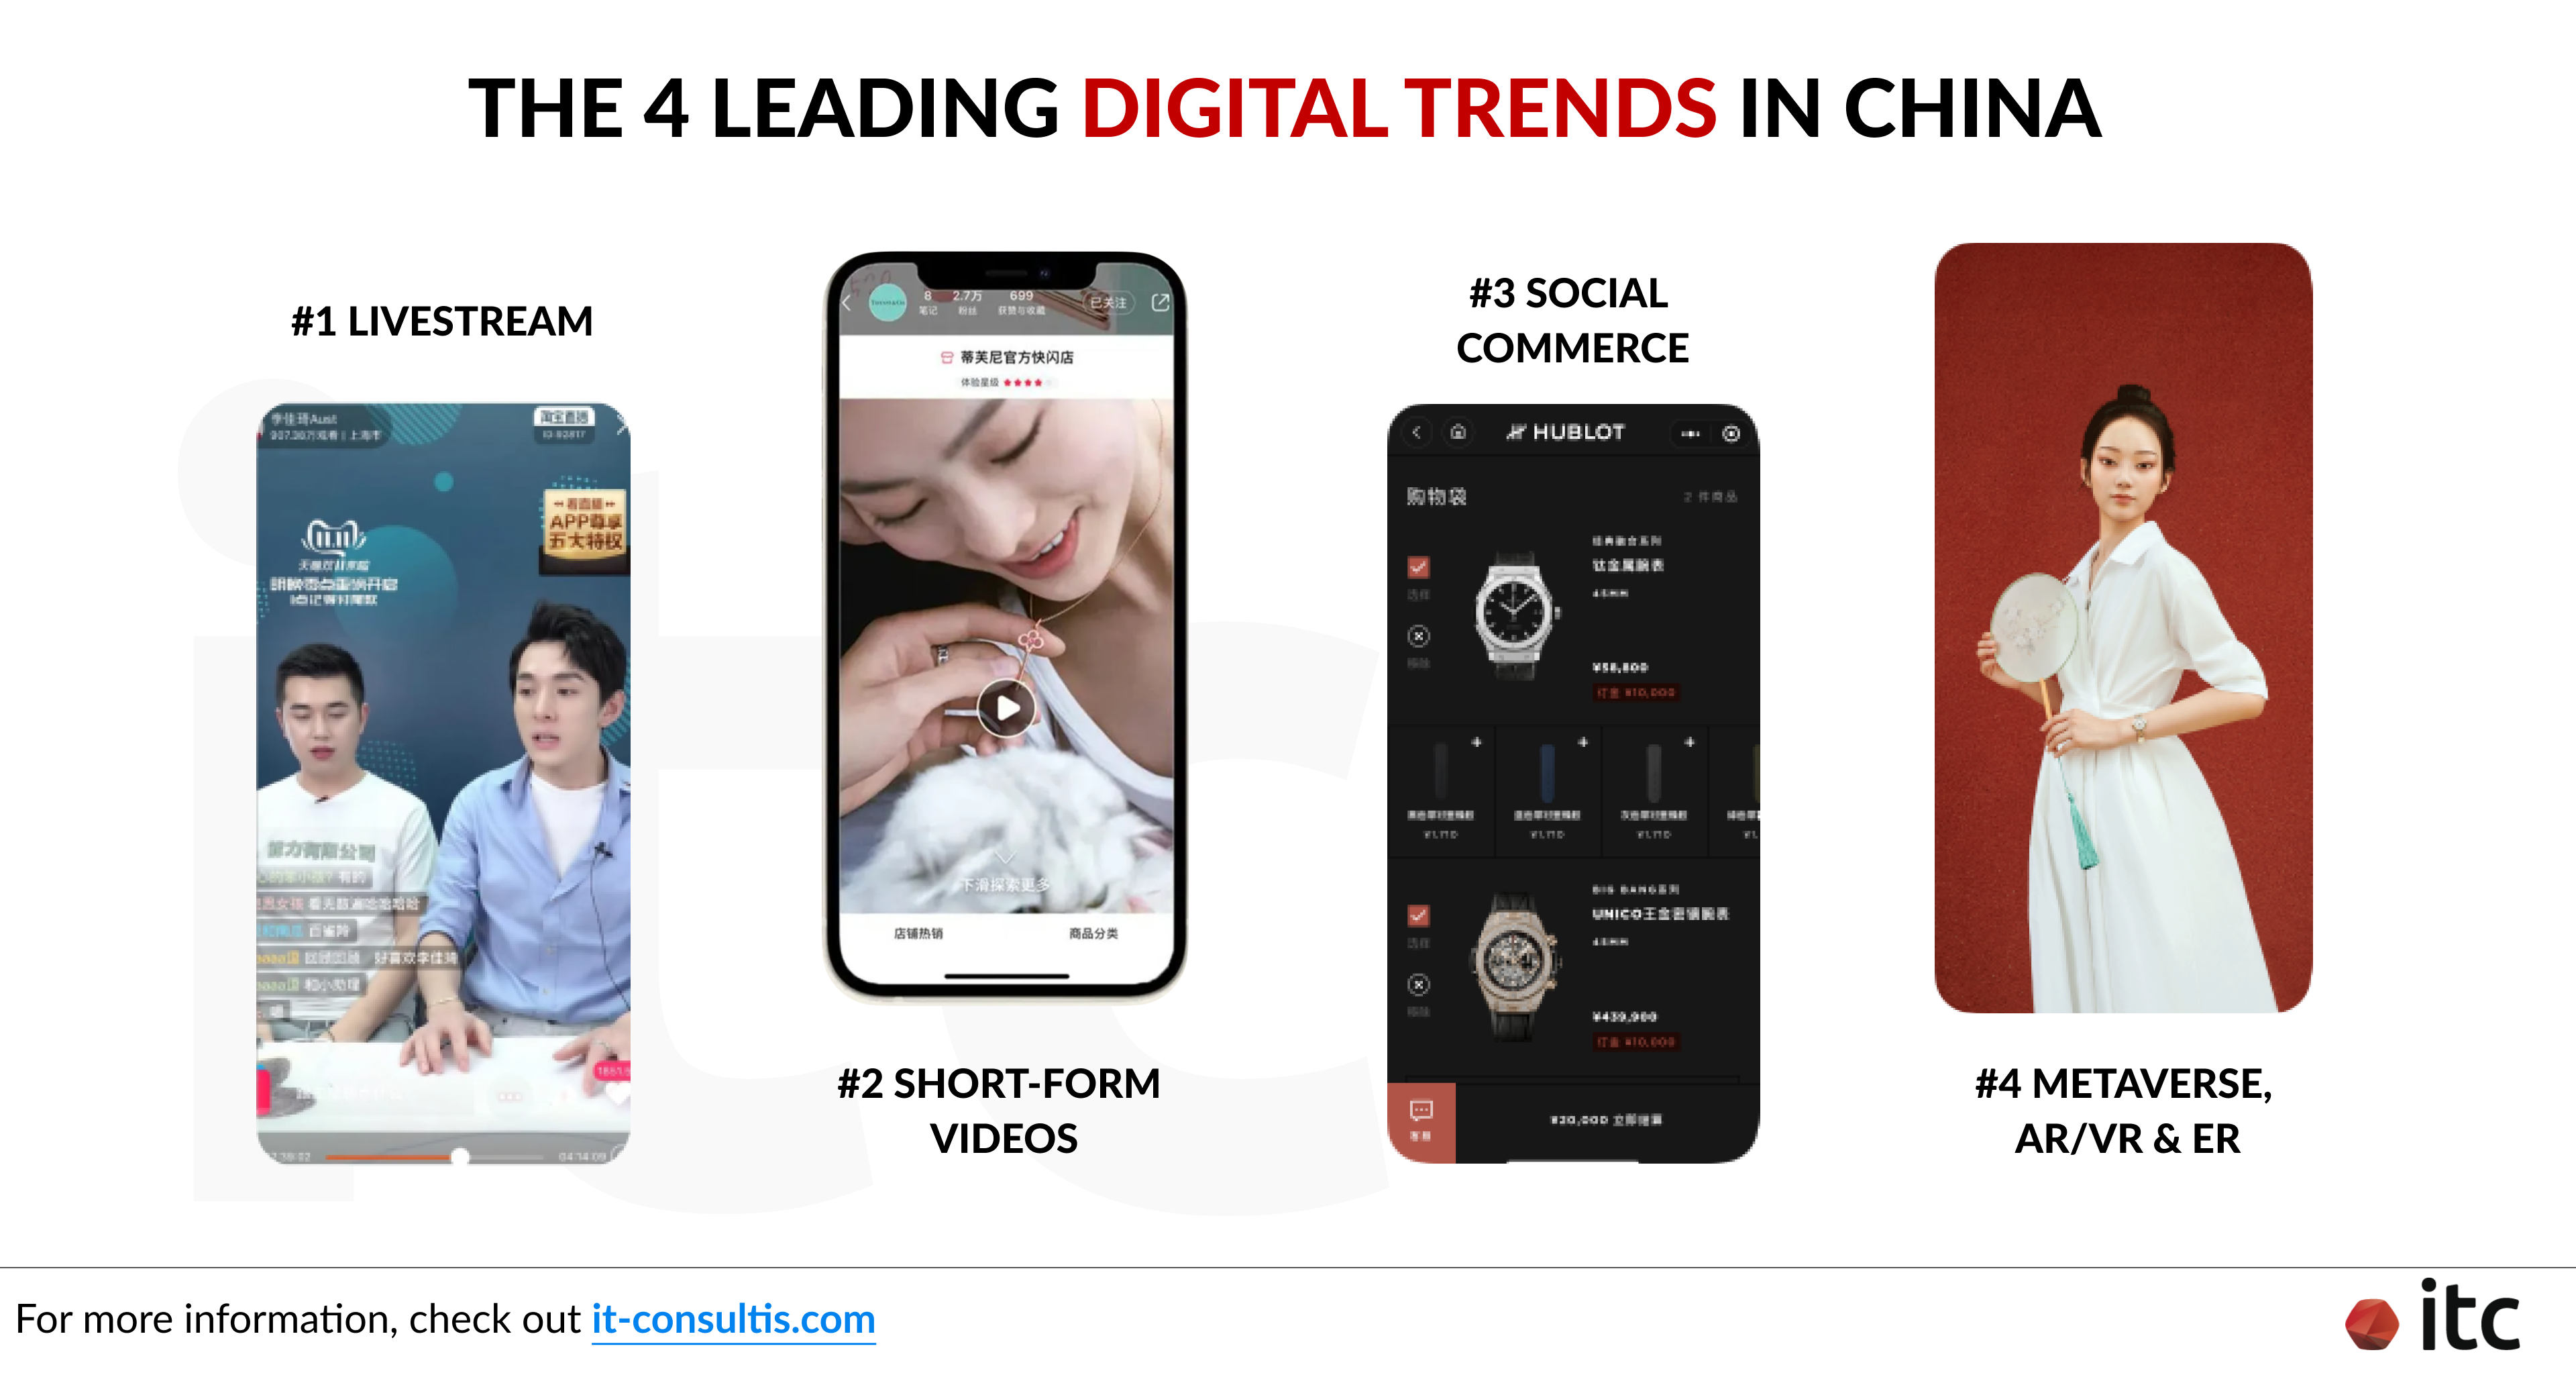 The top 4 leading Digital Trends in China including Livestream, Short-form videos, Social commerce, Metaverse